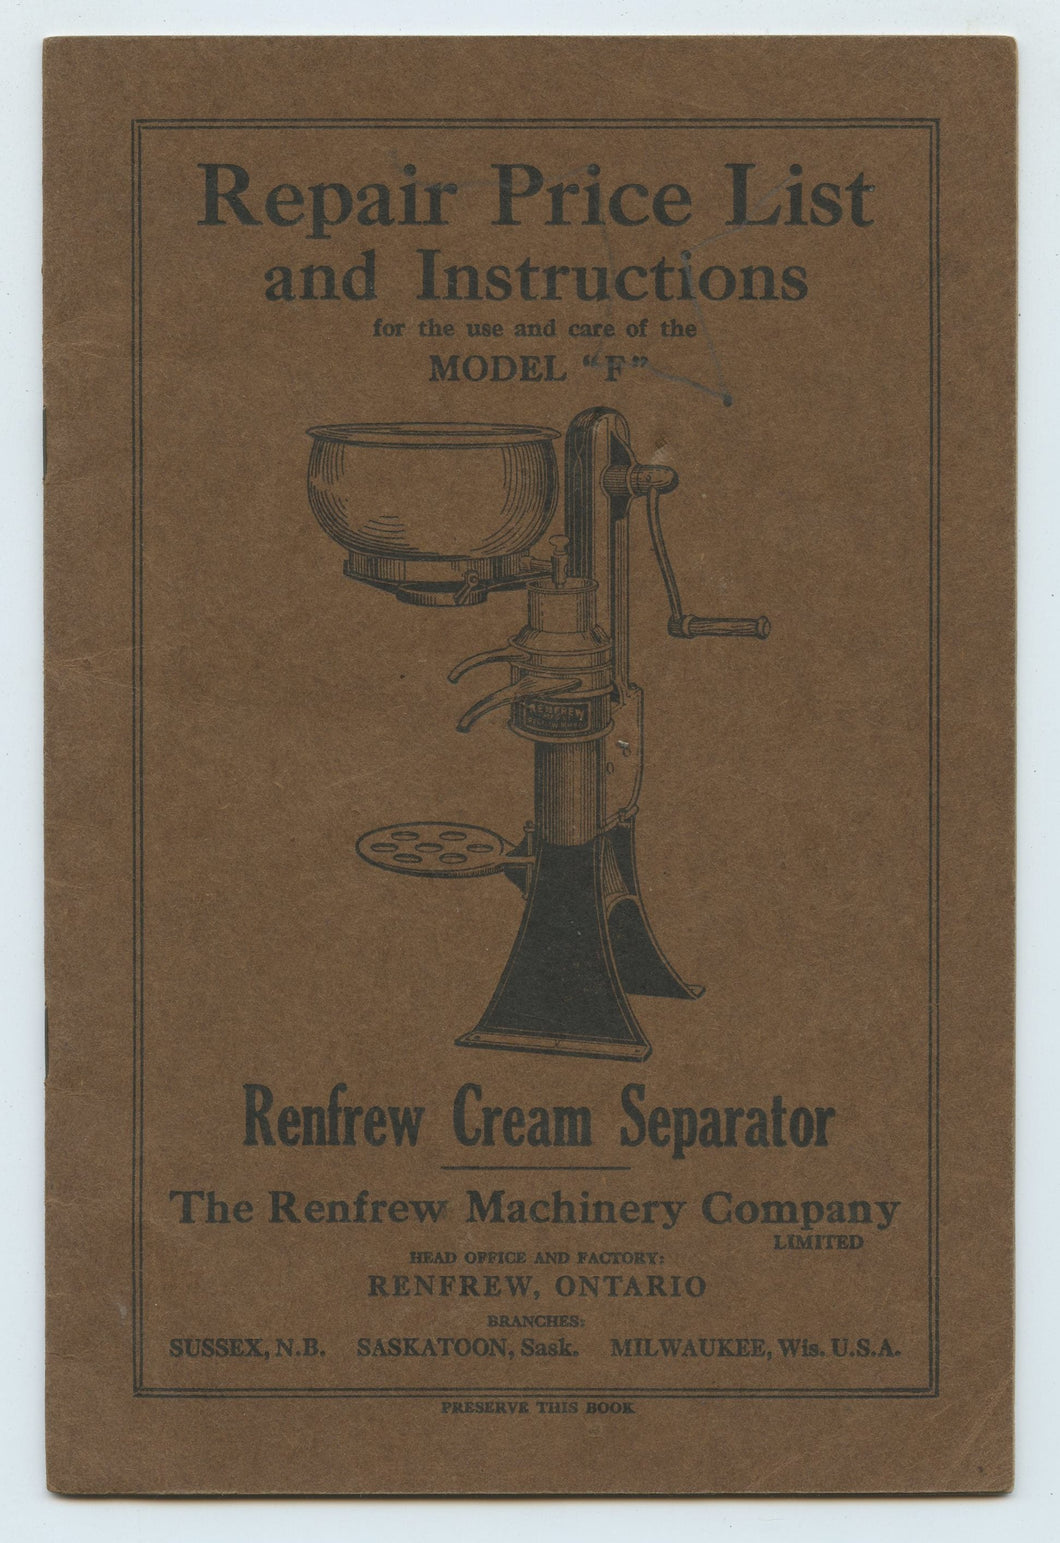 Repair Price List and Instructions for the use and care of the Model "F" Renfrew Cream Separator